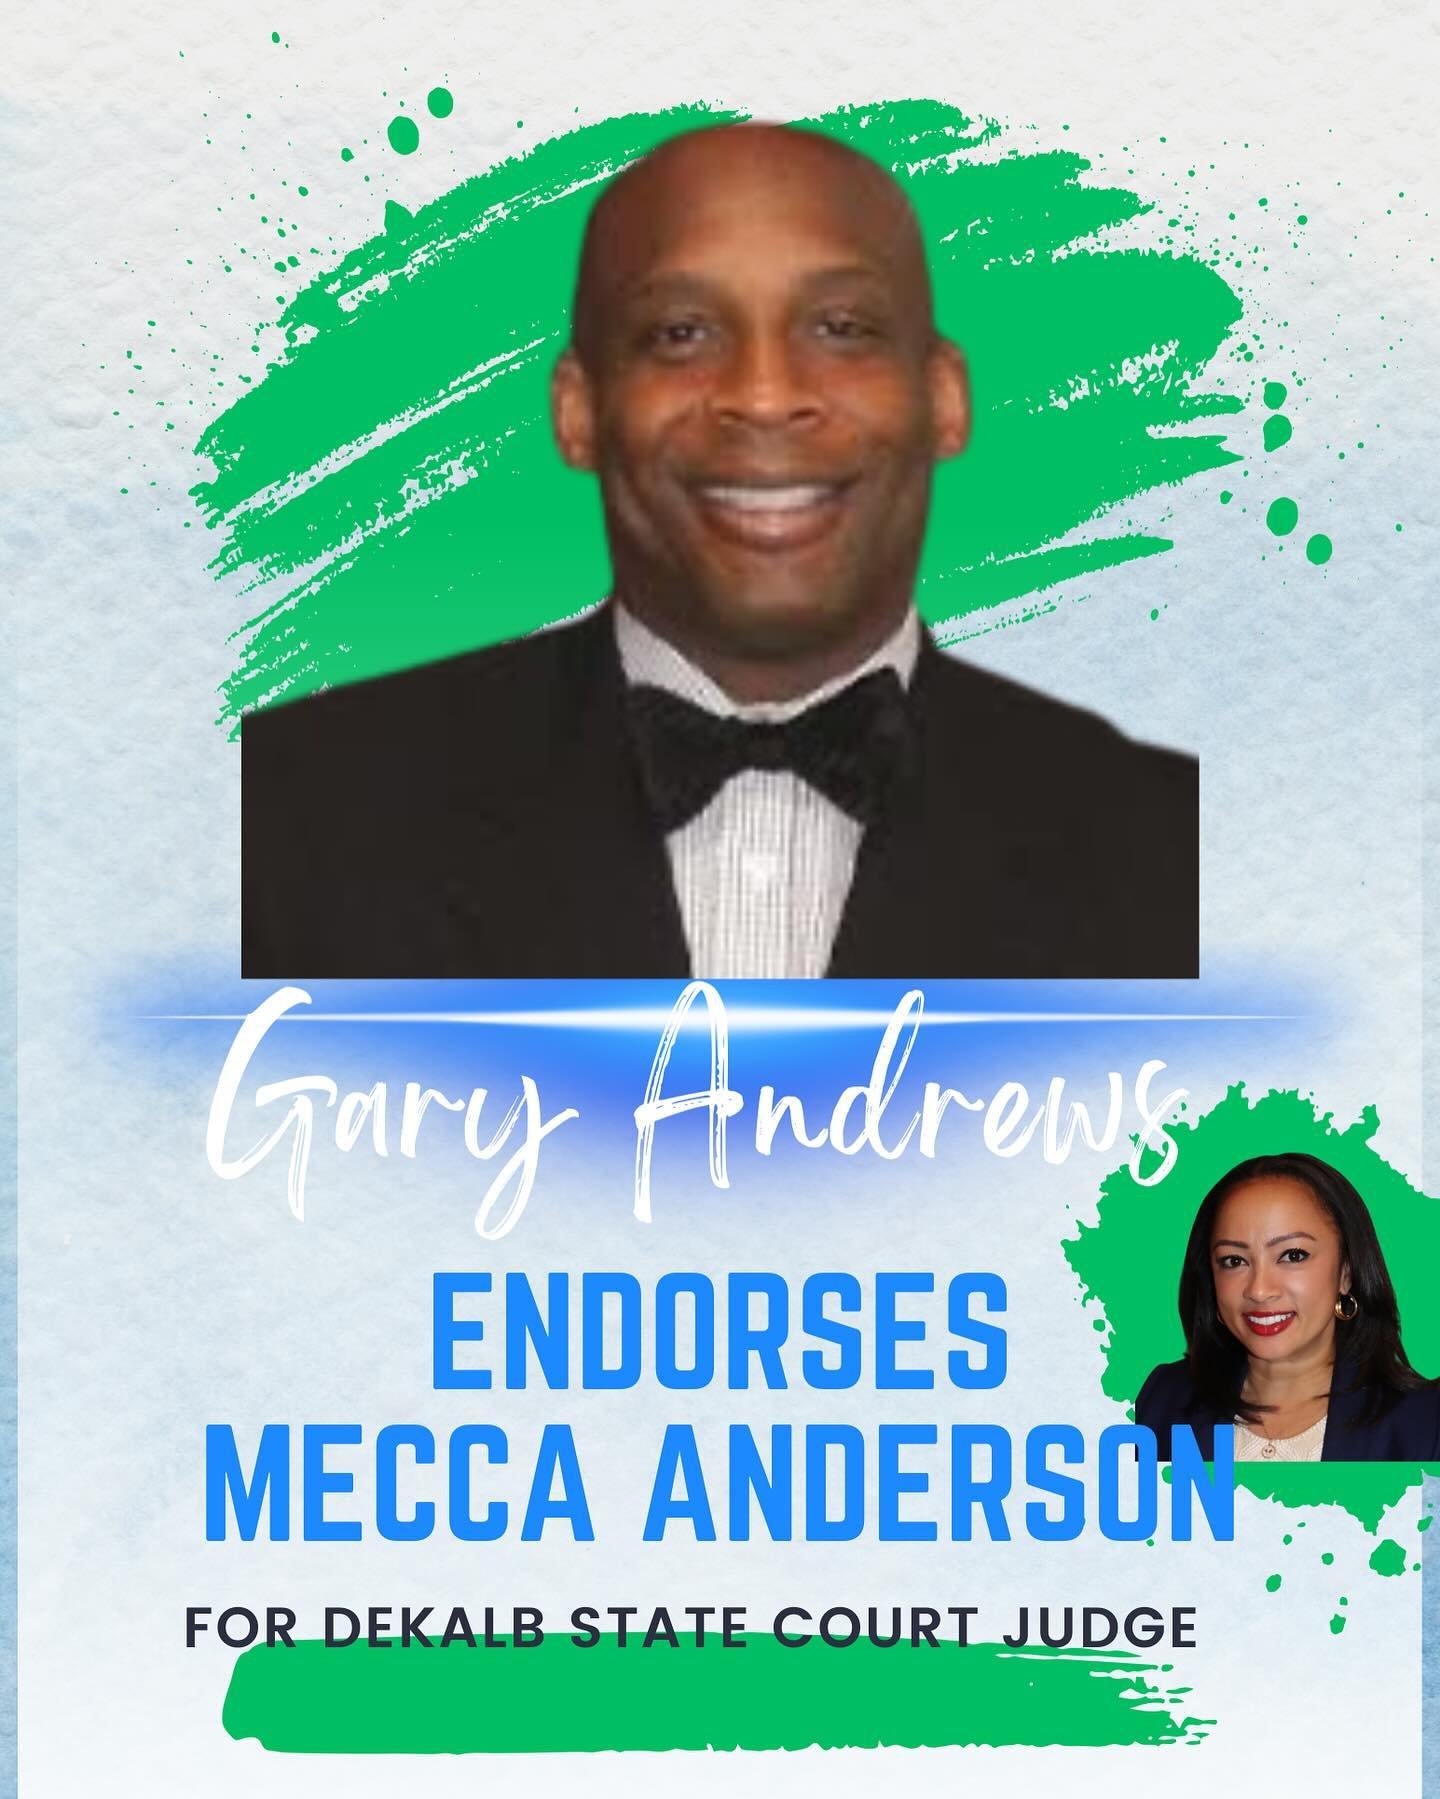 3. I am truly grateful to have the support and endorsement of my dear friend, Gary Andrews from The Cochran Firm. Gary is not only a highly respected lawyer but also a trusted ally who has been instrumental in guiding and supporting me throughout my 